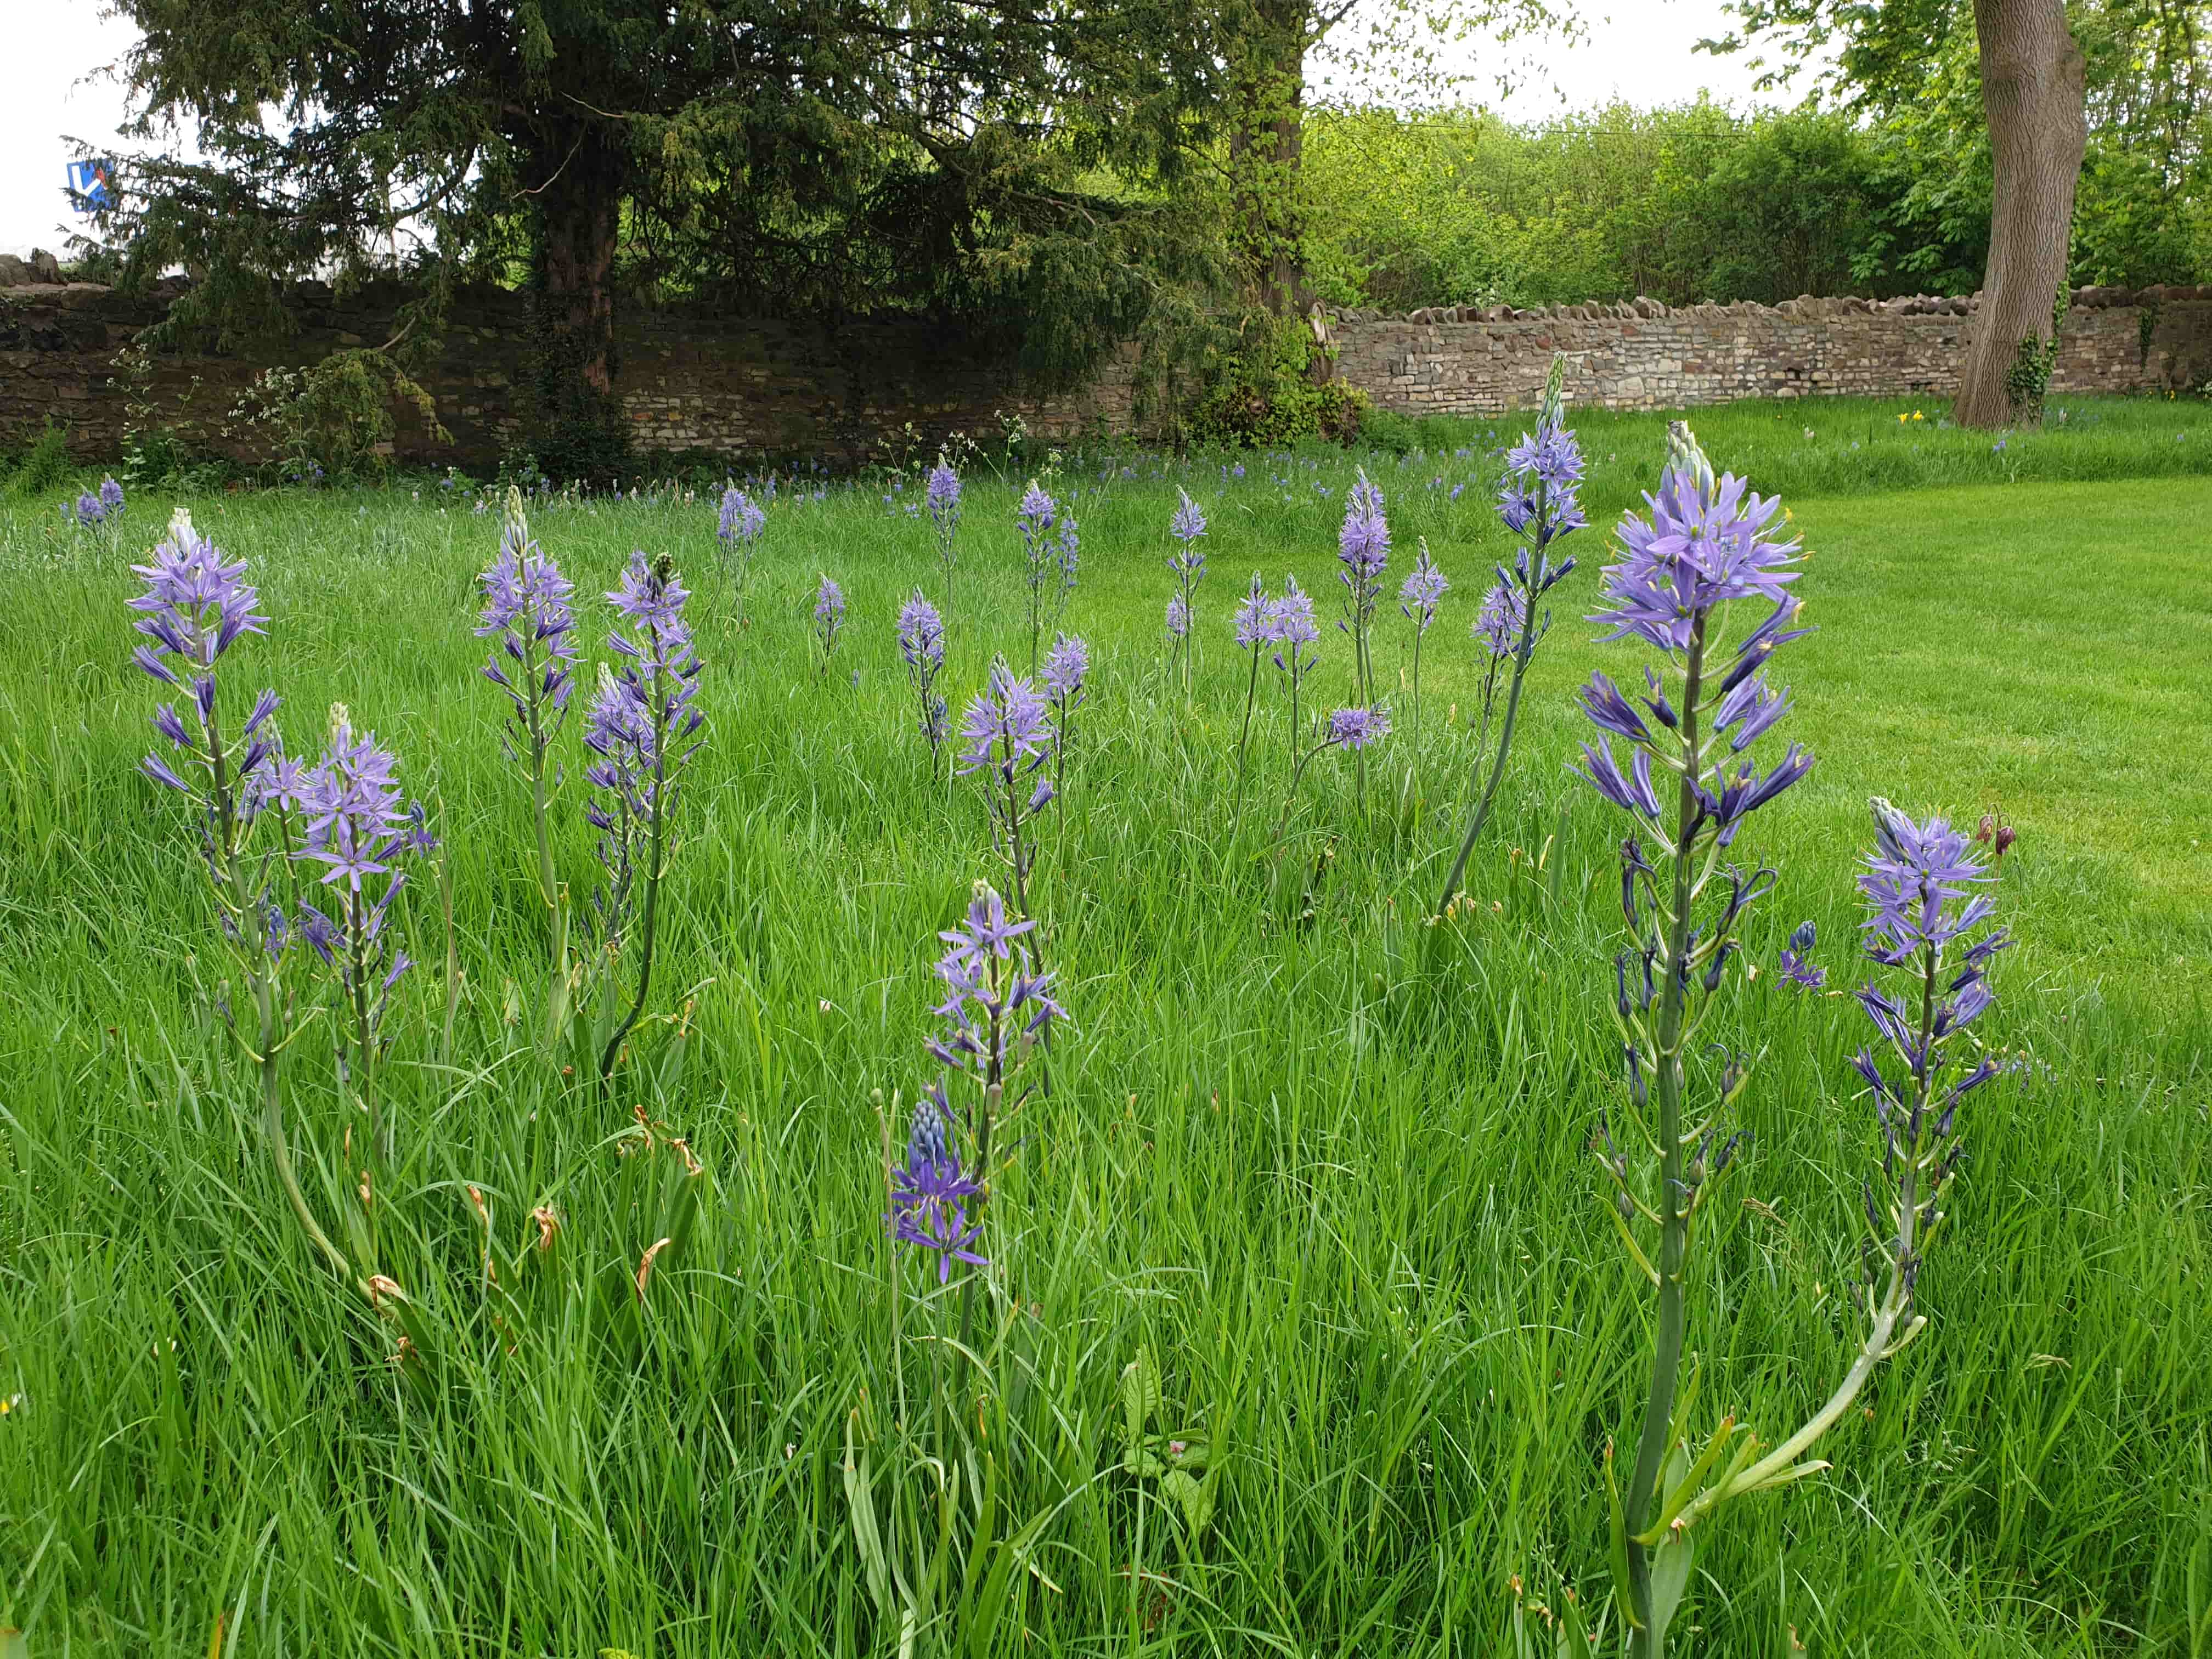 Camassia leichtlinii naturalised in a meadow